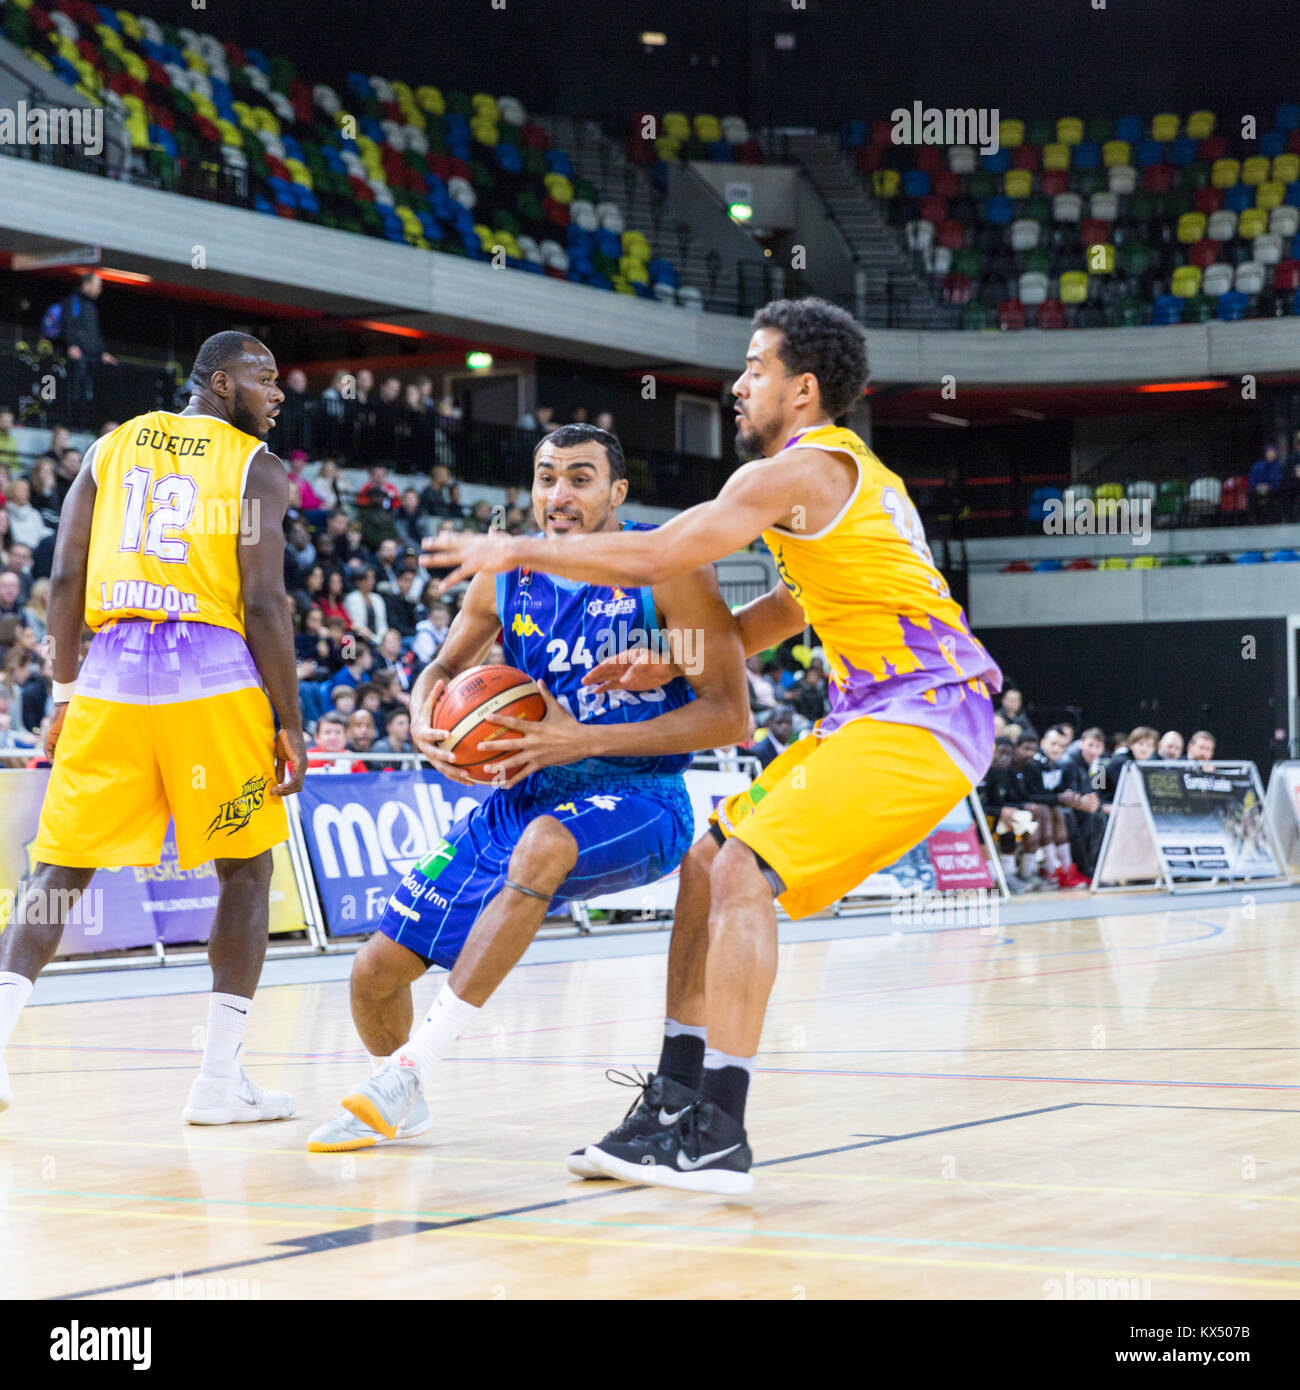 Copper Box Arena, London, UK, 7th Jan 2018. Zach Gachette with the ball. Tensions run high in the London Lions v Sheffield Sharks British Basketball League game in the Queen Elizabeth Olympic Park in London. Lions win 81 - 73. Credit: Imageplotter News and Sports/Alamy Live News Stock Photo